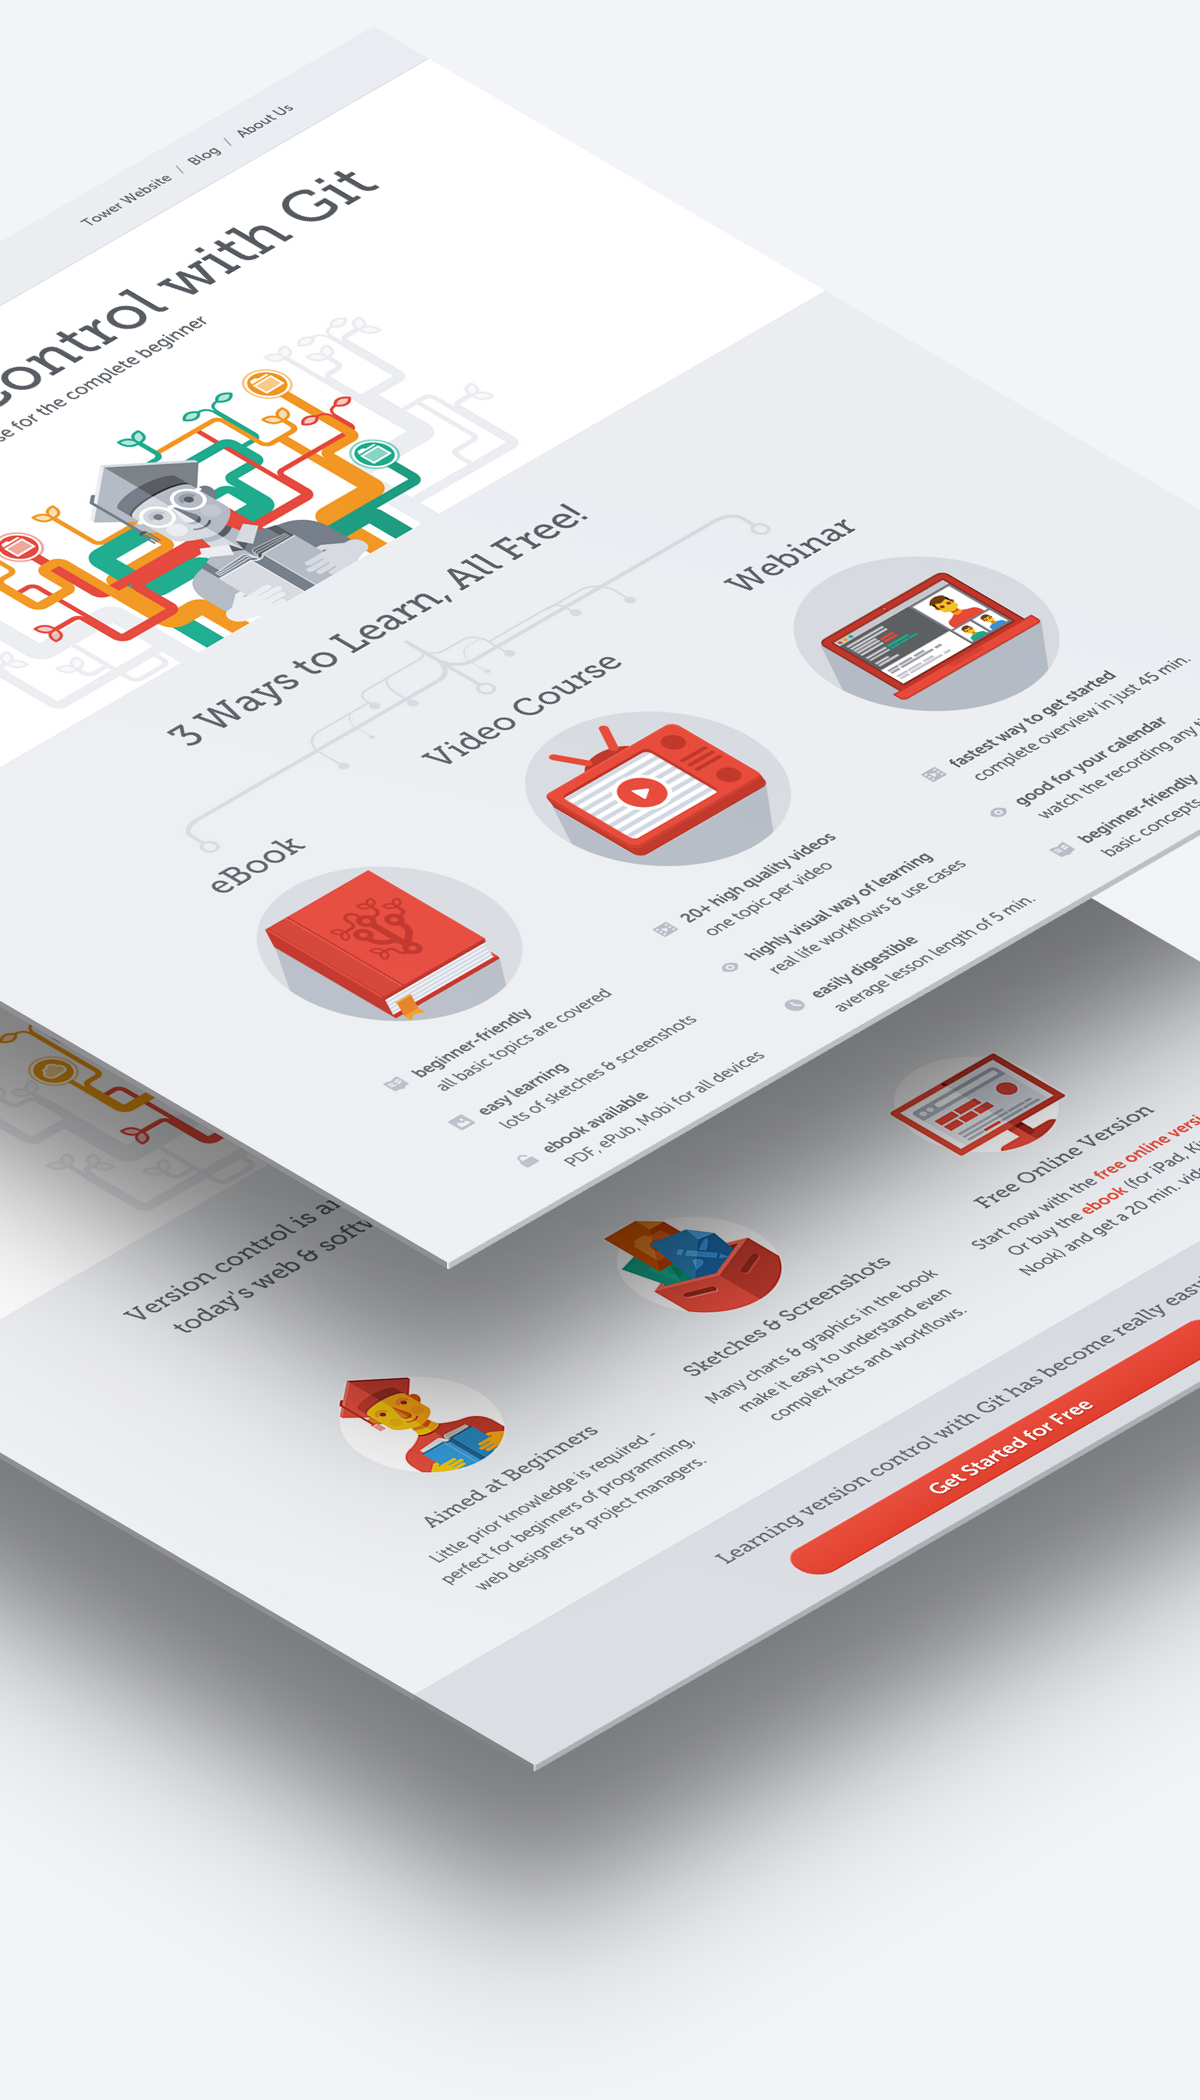 git learn Technology Version Control Online course flat simple Illustrative landing page tutorial Character icons Education